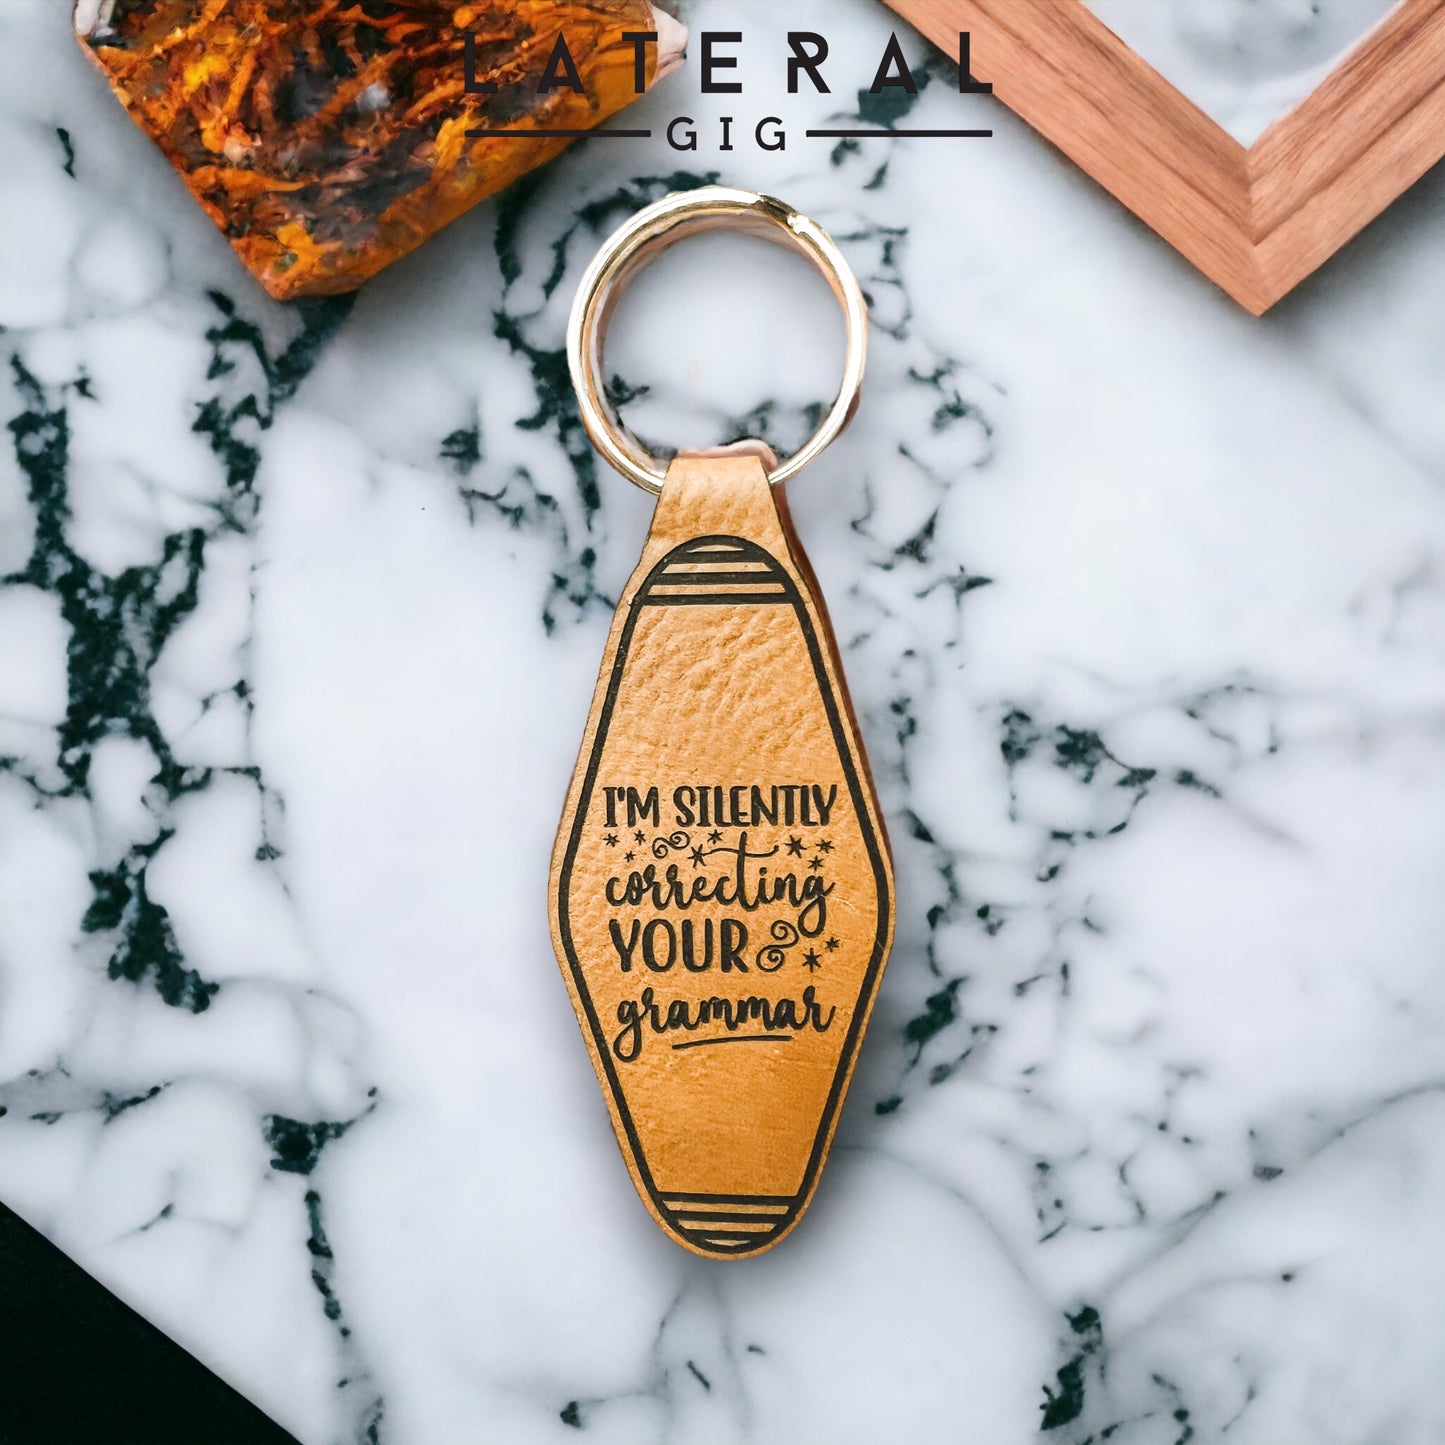 I’m Silently correcting Your Grammar Leather Keychain